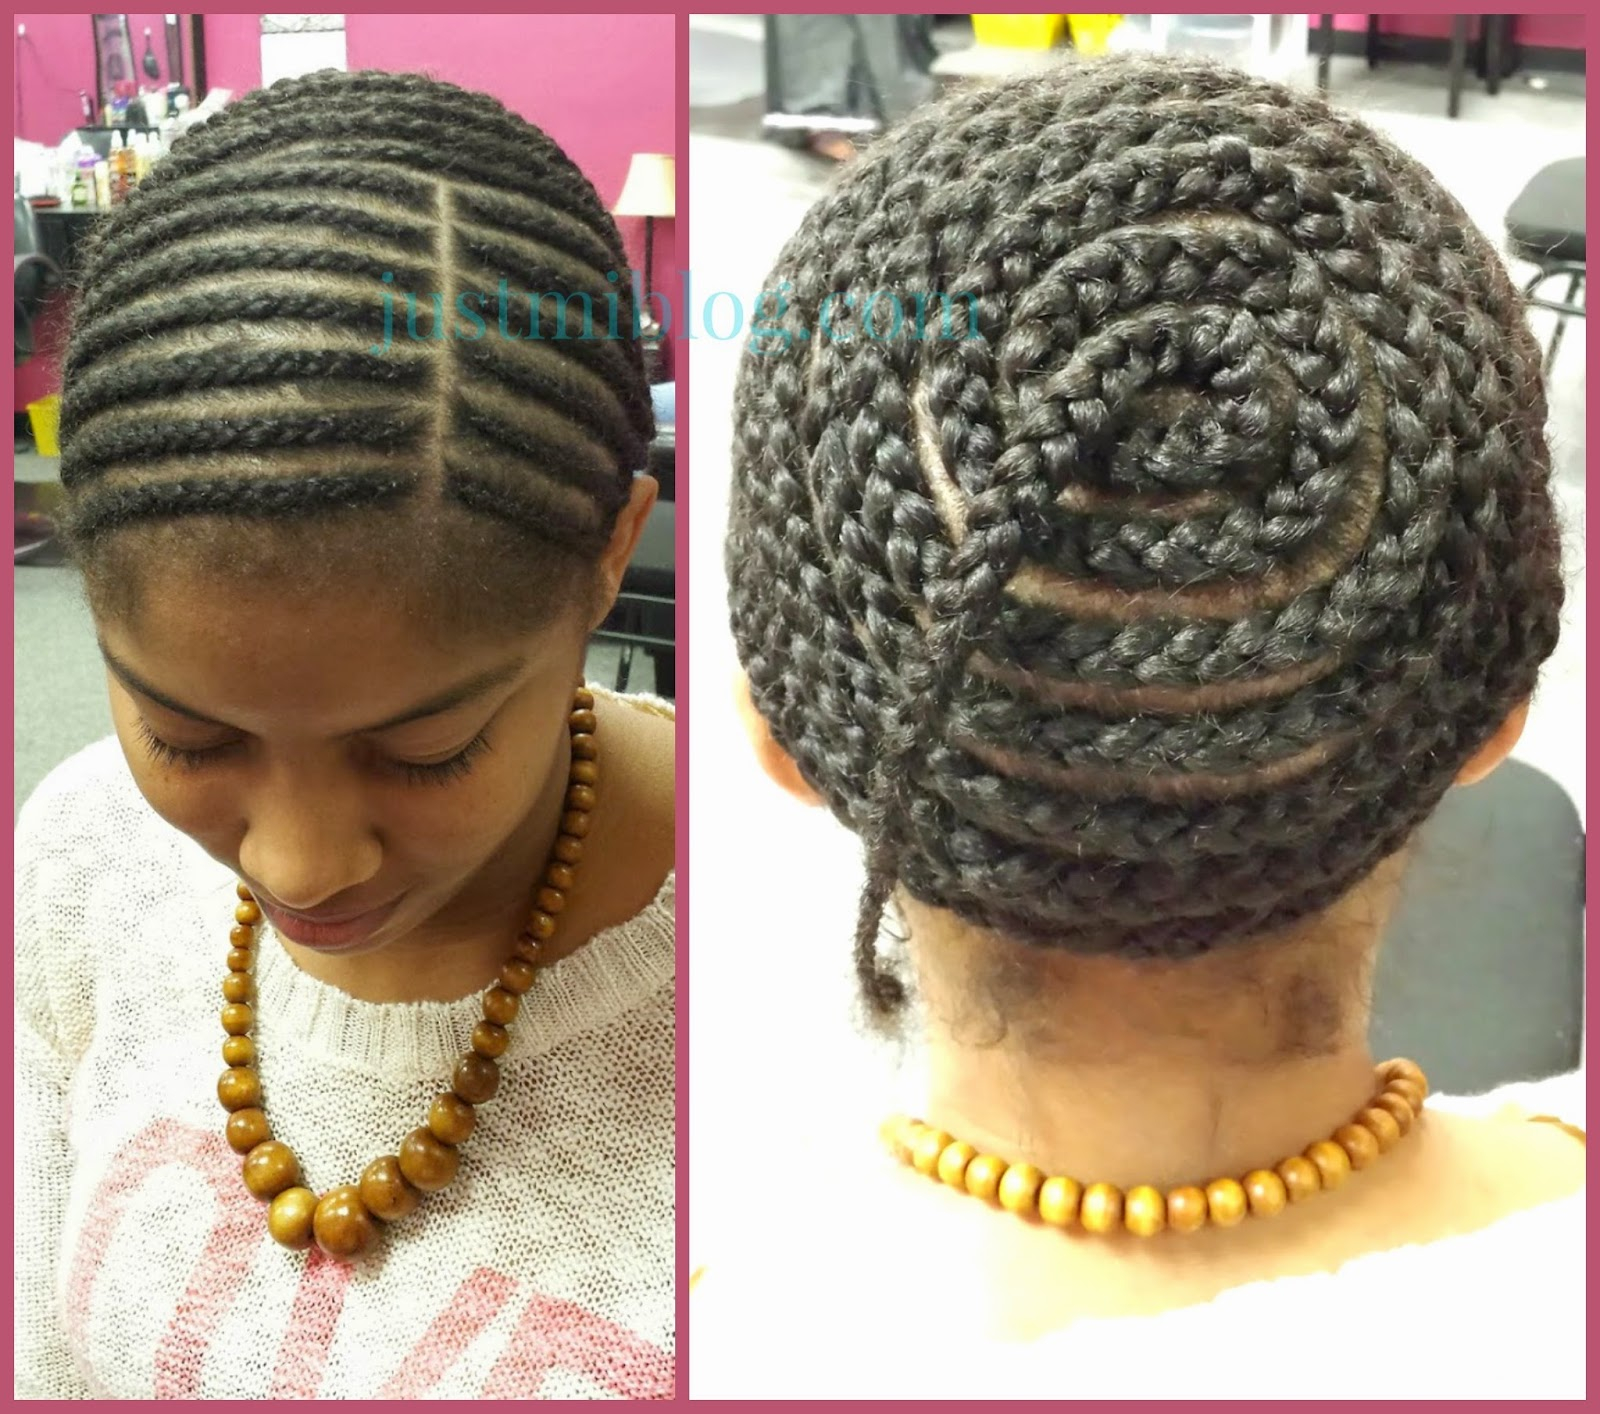 Crochet Braid Pattern Crochet Braid Patterns To Try Out